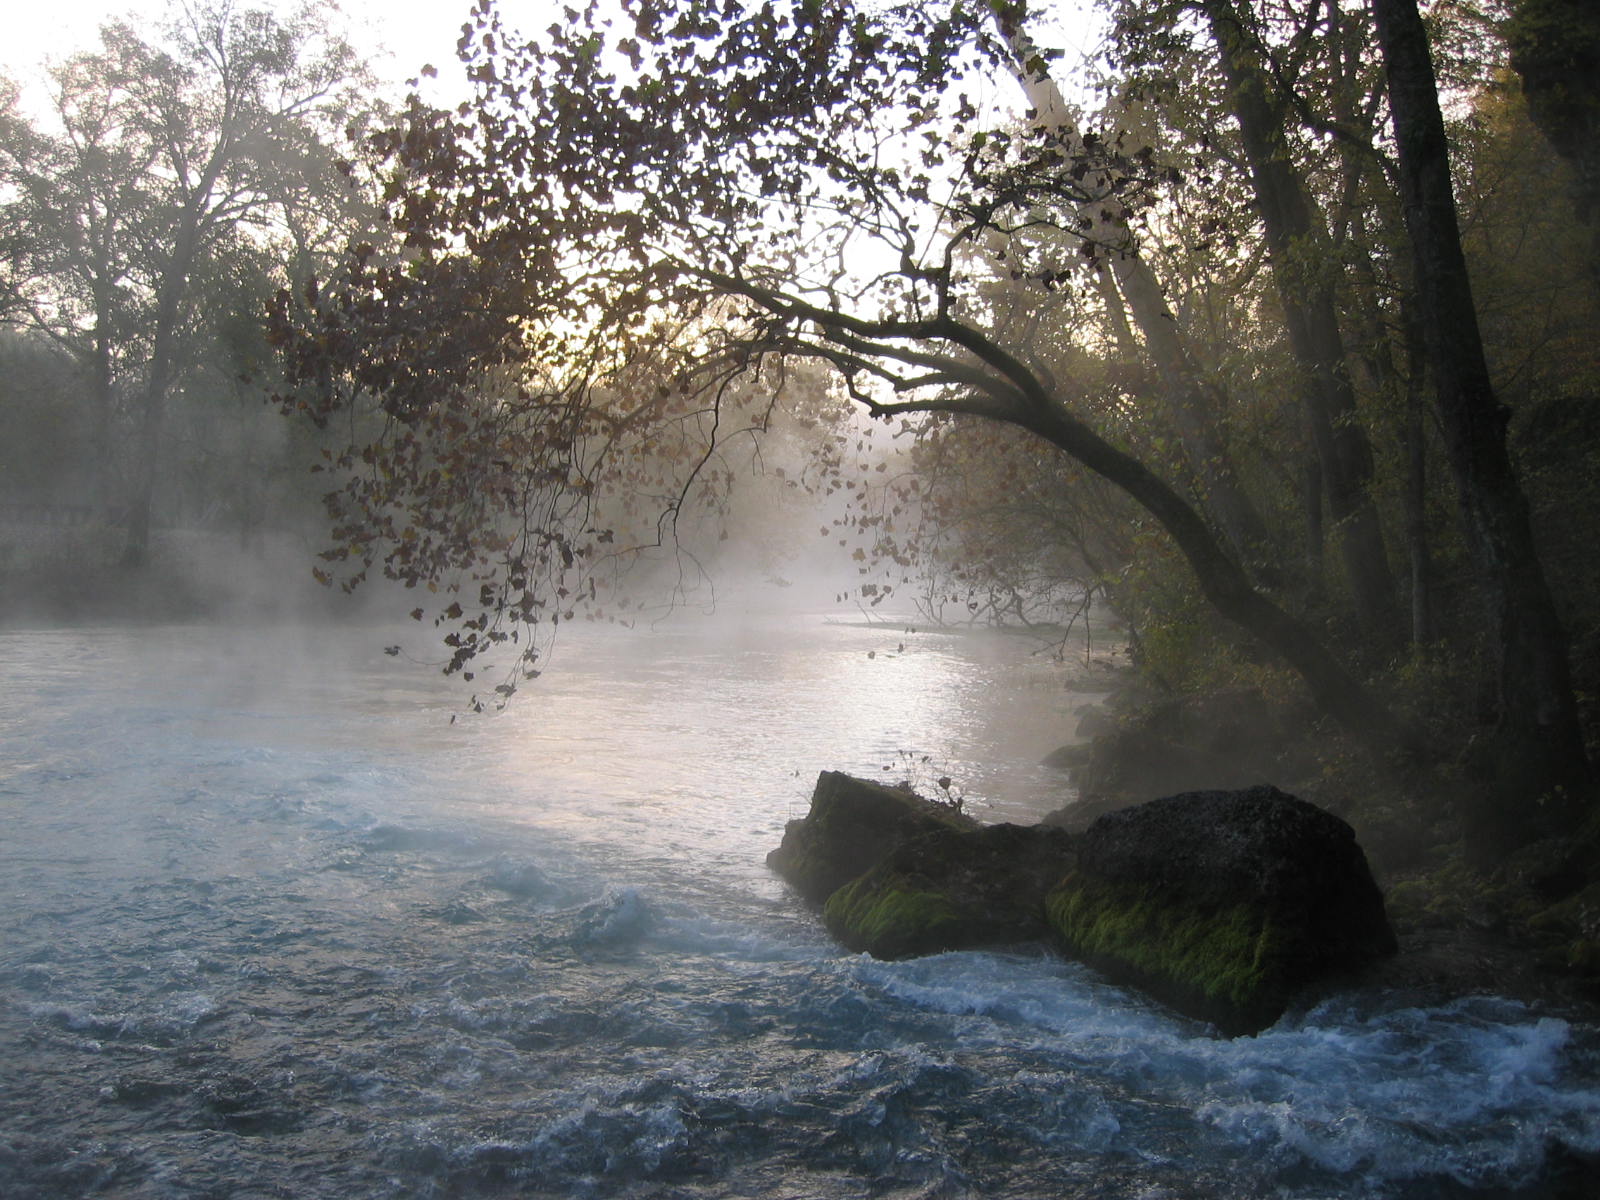 A sunrise photo with blue turbulent water and a algae colored rock with trees overhanging